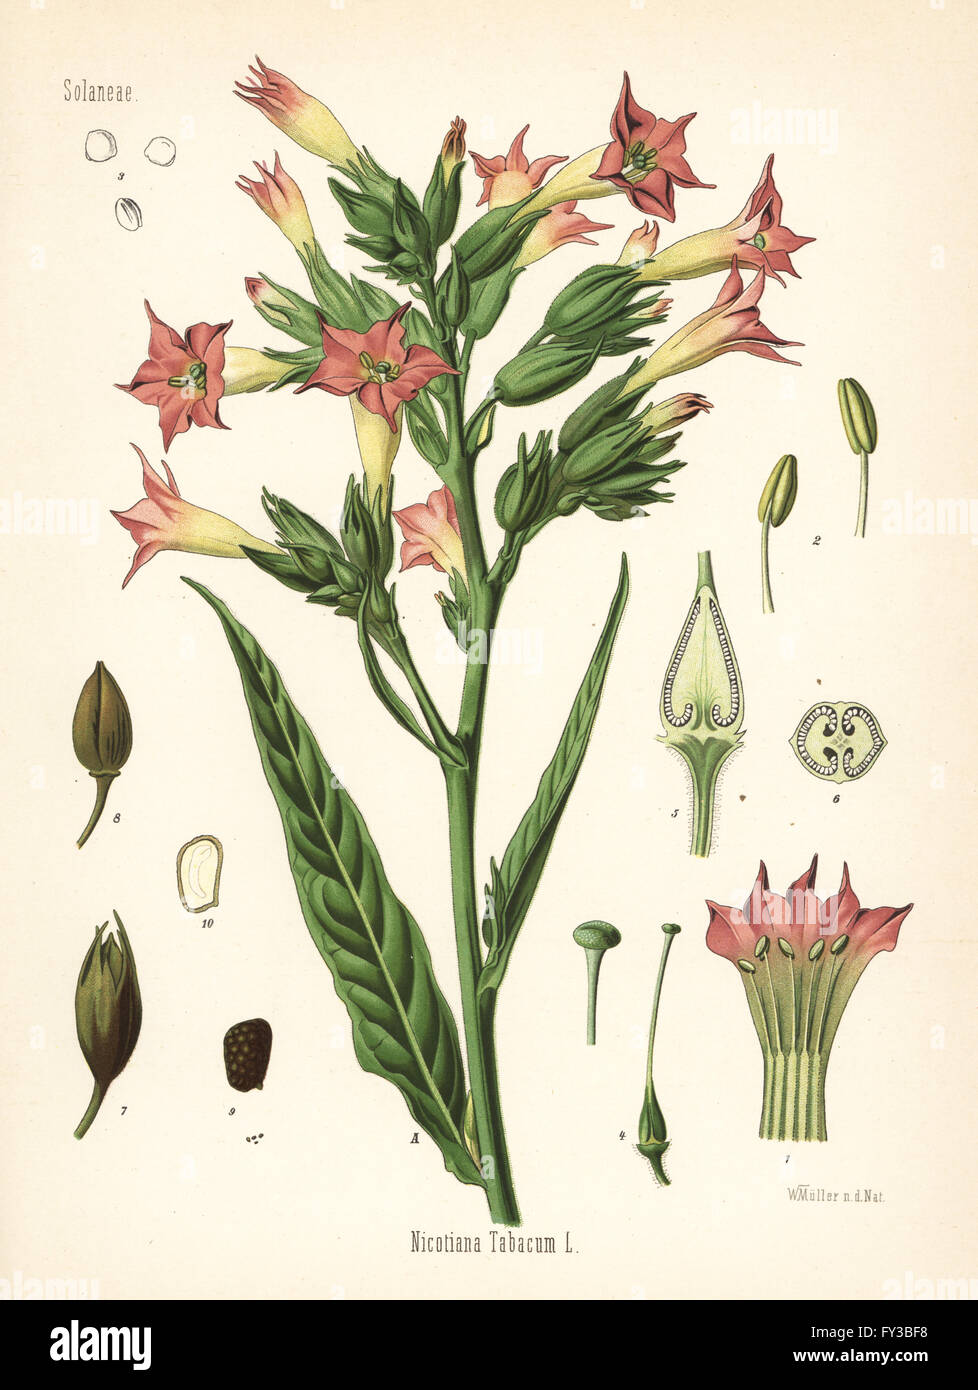 Tobacco, Nicotiana tabacum. Chromolithograph after a botanical illustration by Walther Muller from Hermann Adolph Koehler's Medicinal Plants, edited by Gustav Pabst, Koehler, Germany, 1887. Stock Photo